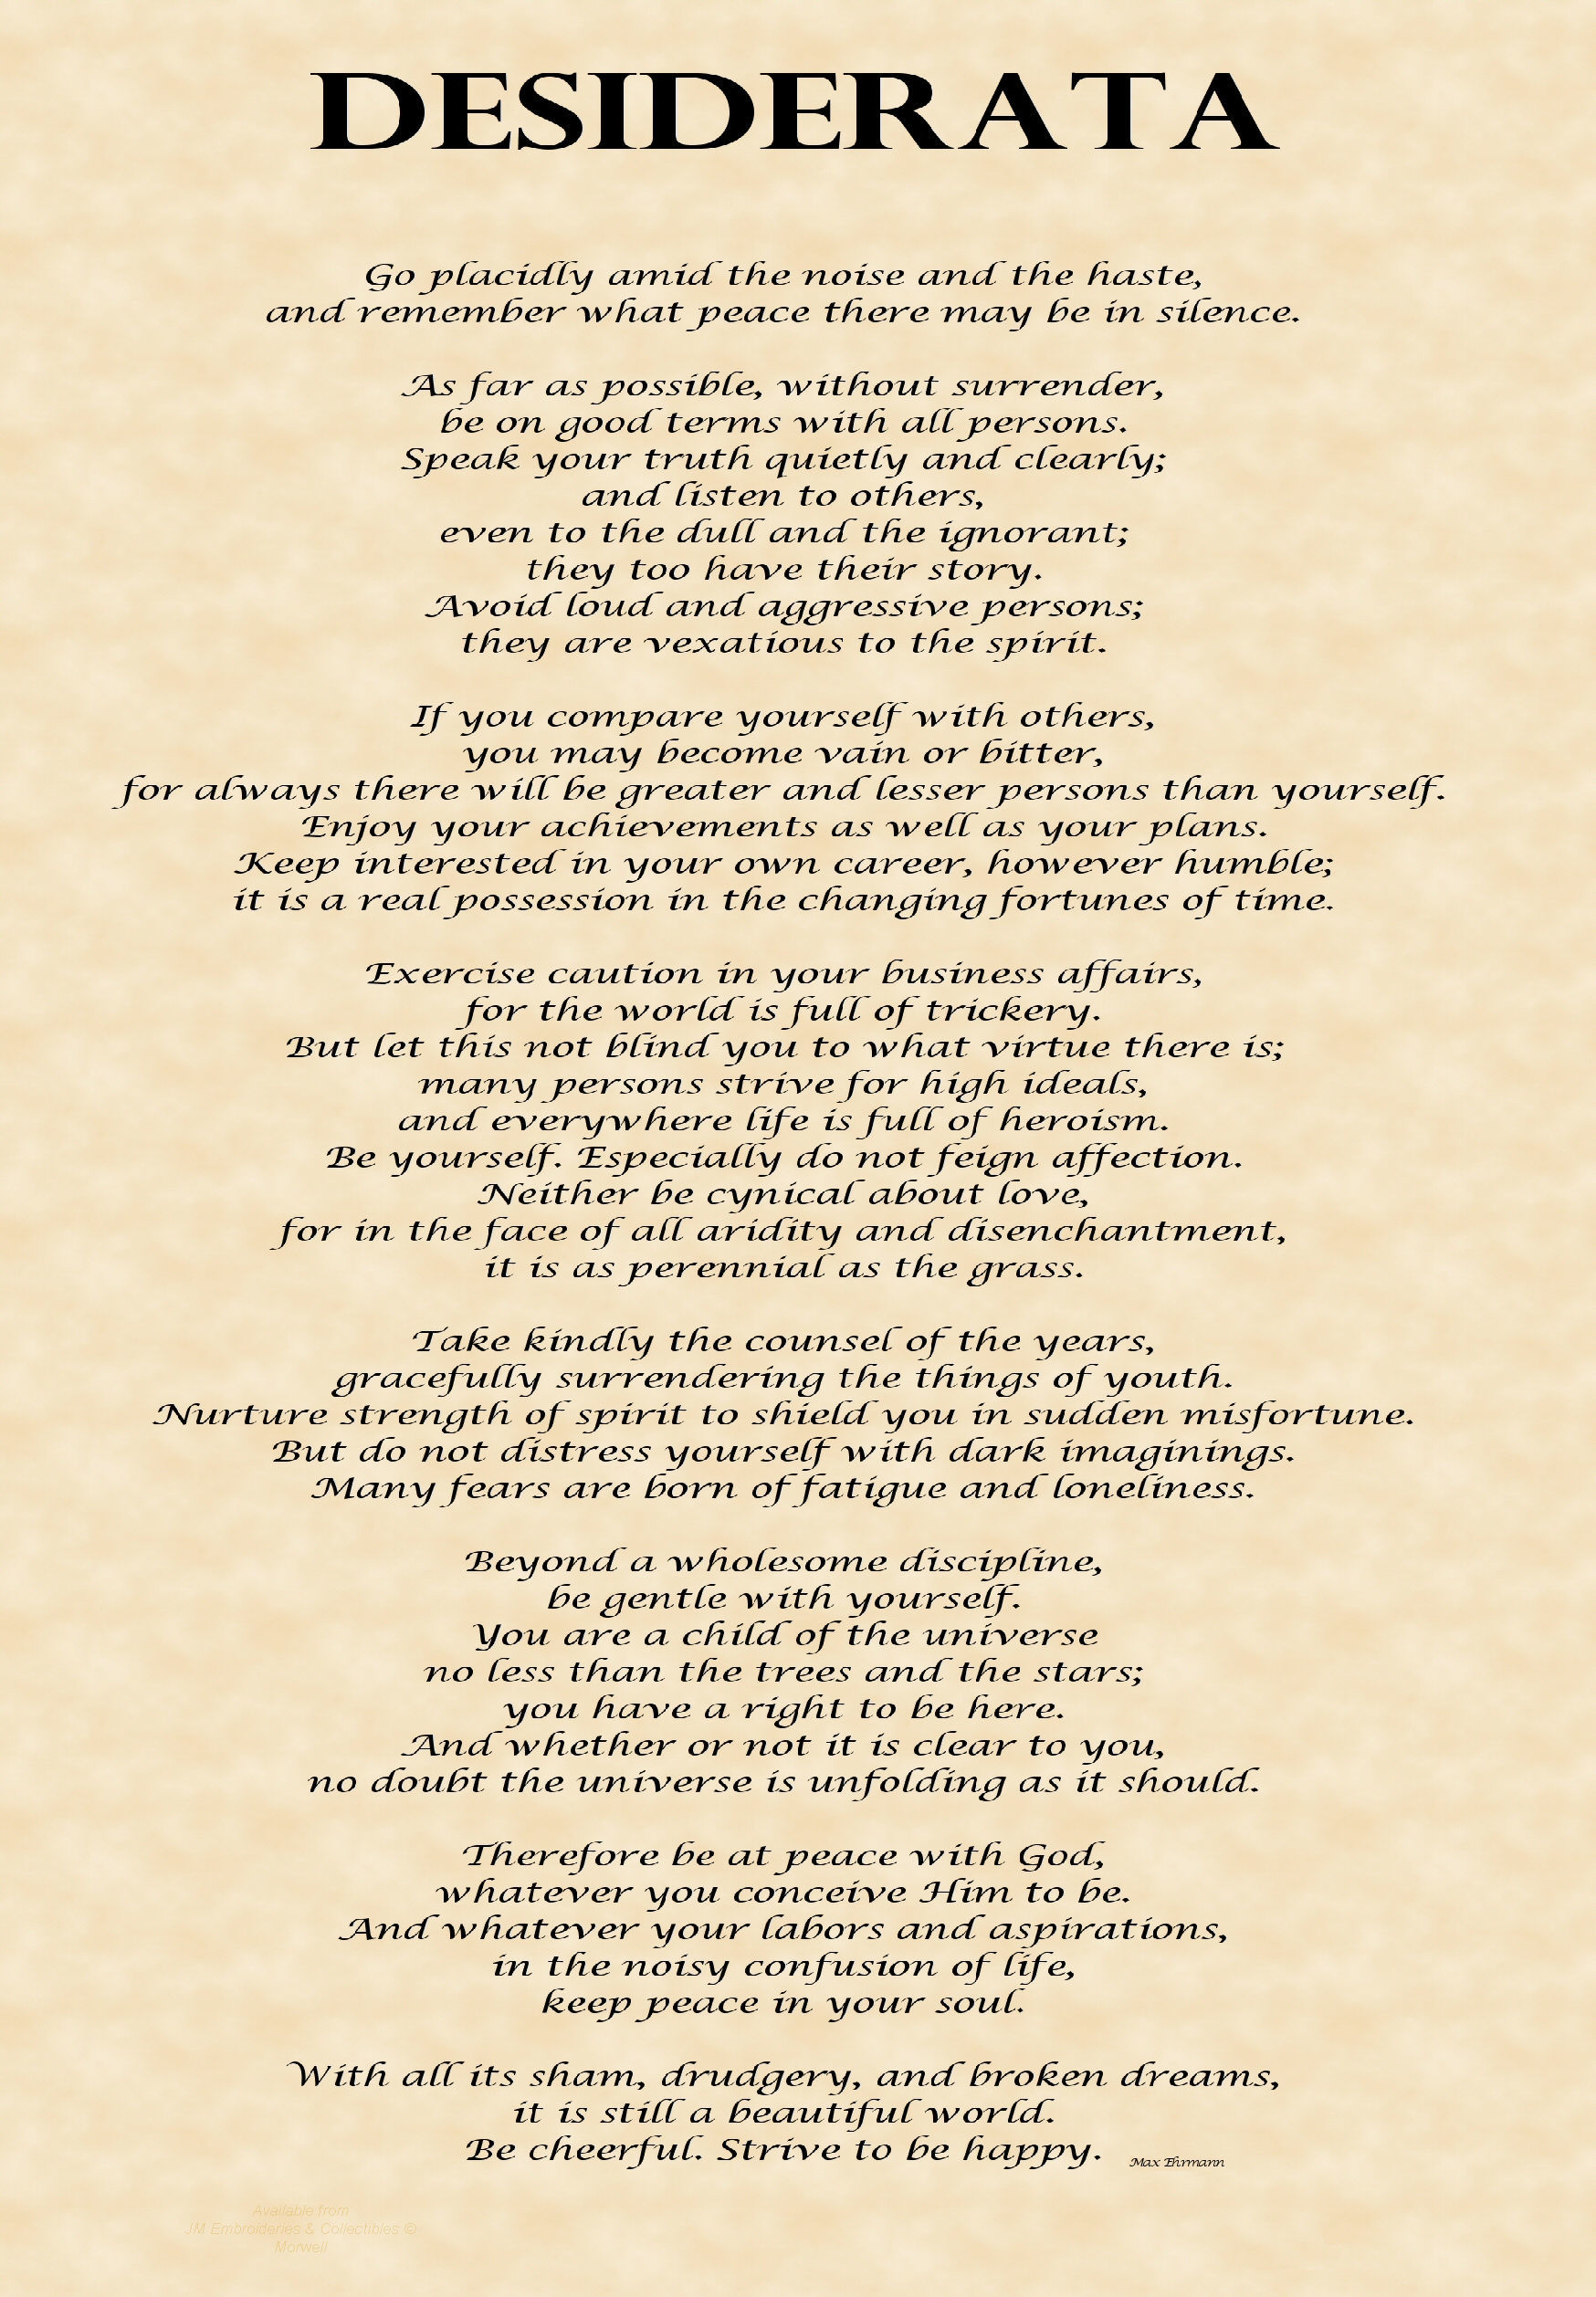 Desiderata on A3 Poster, High Quality Gloss 150gsm Paper, 297 x